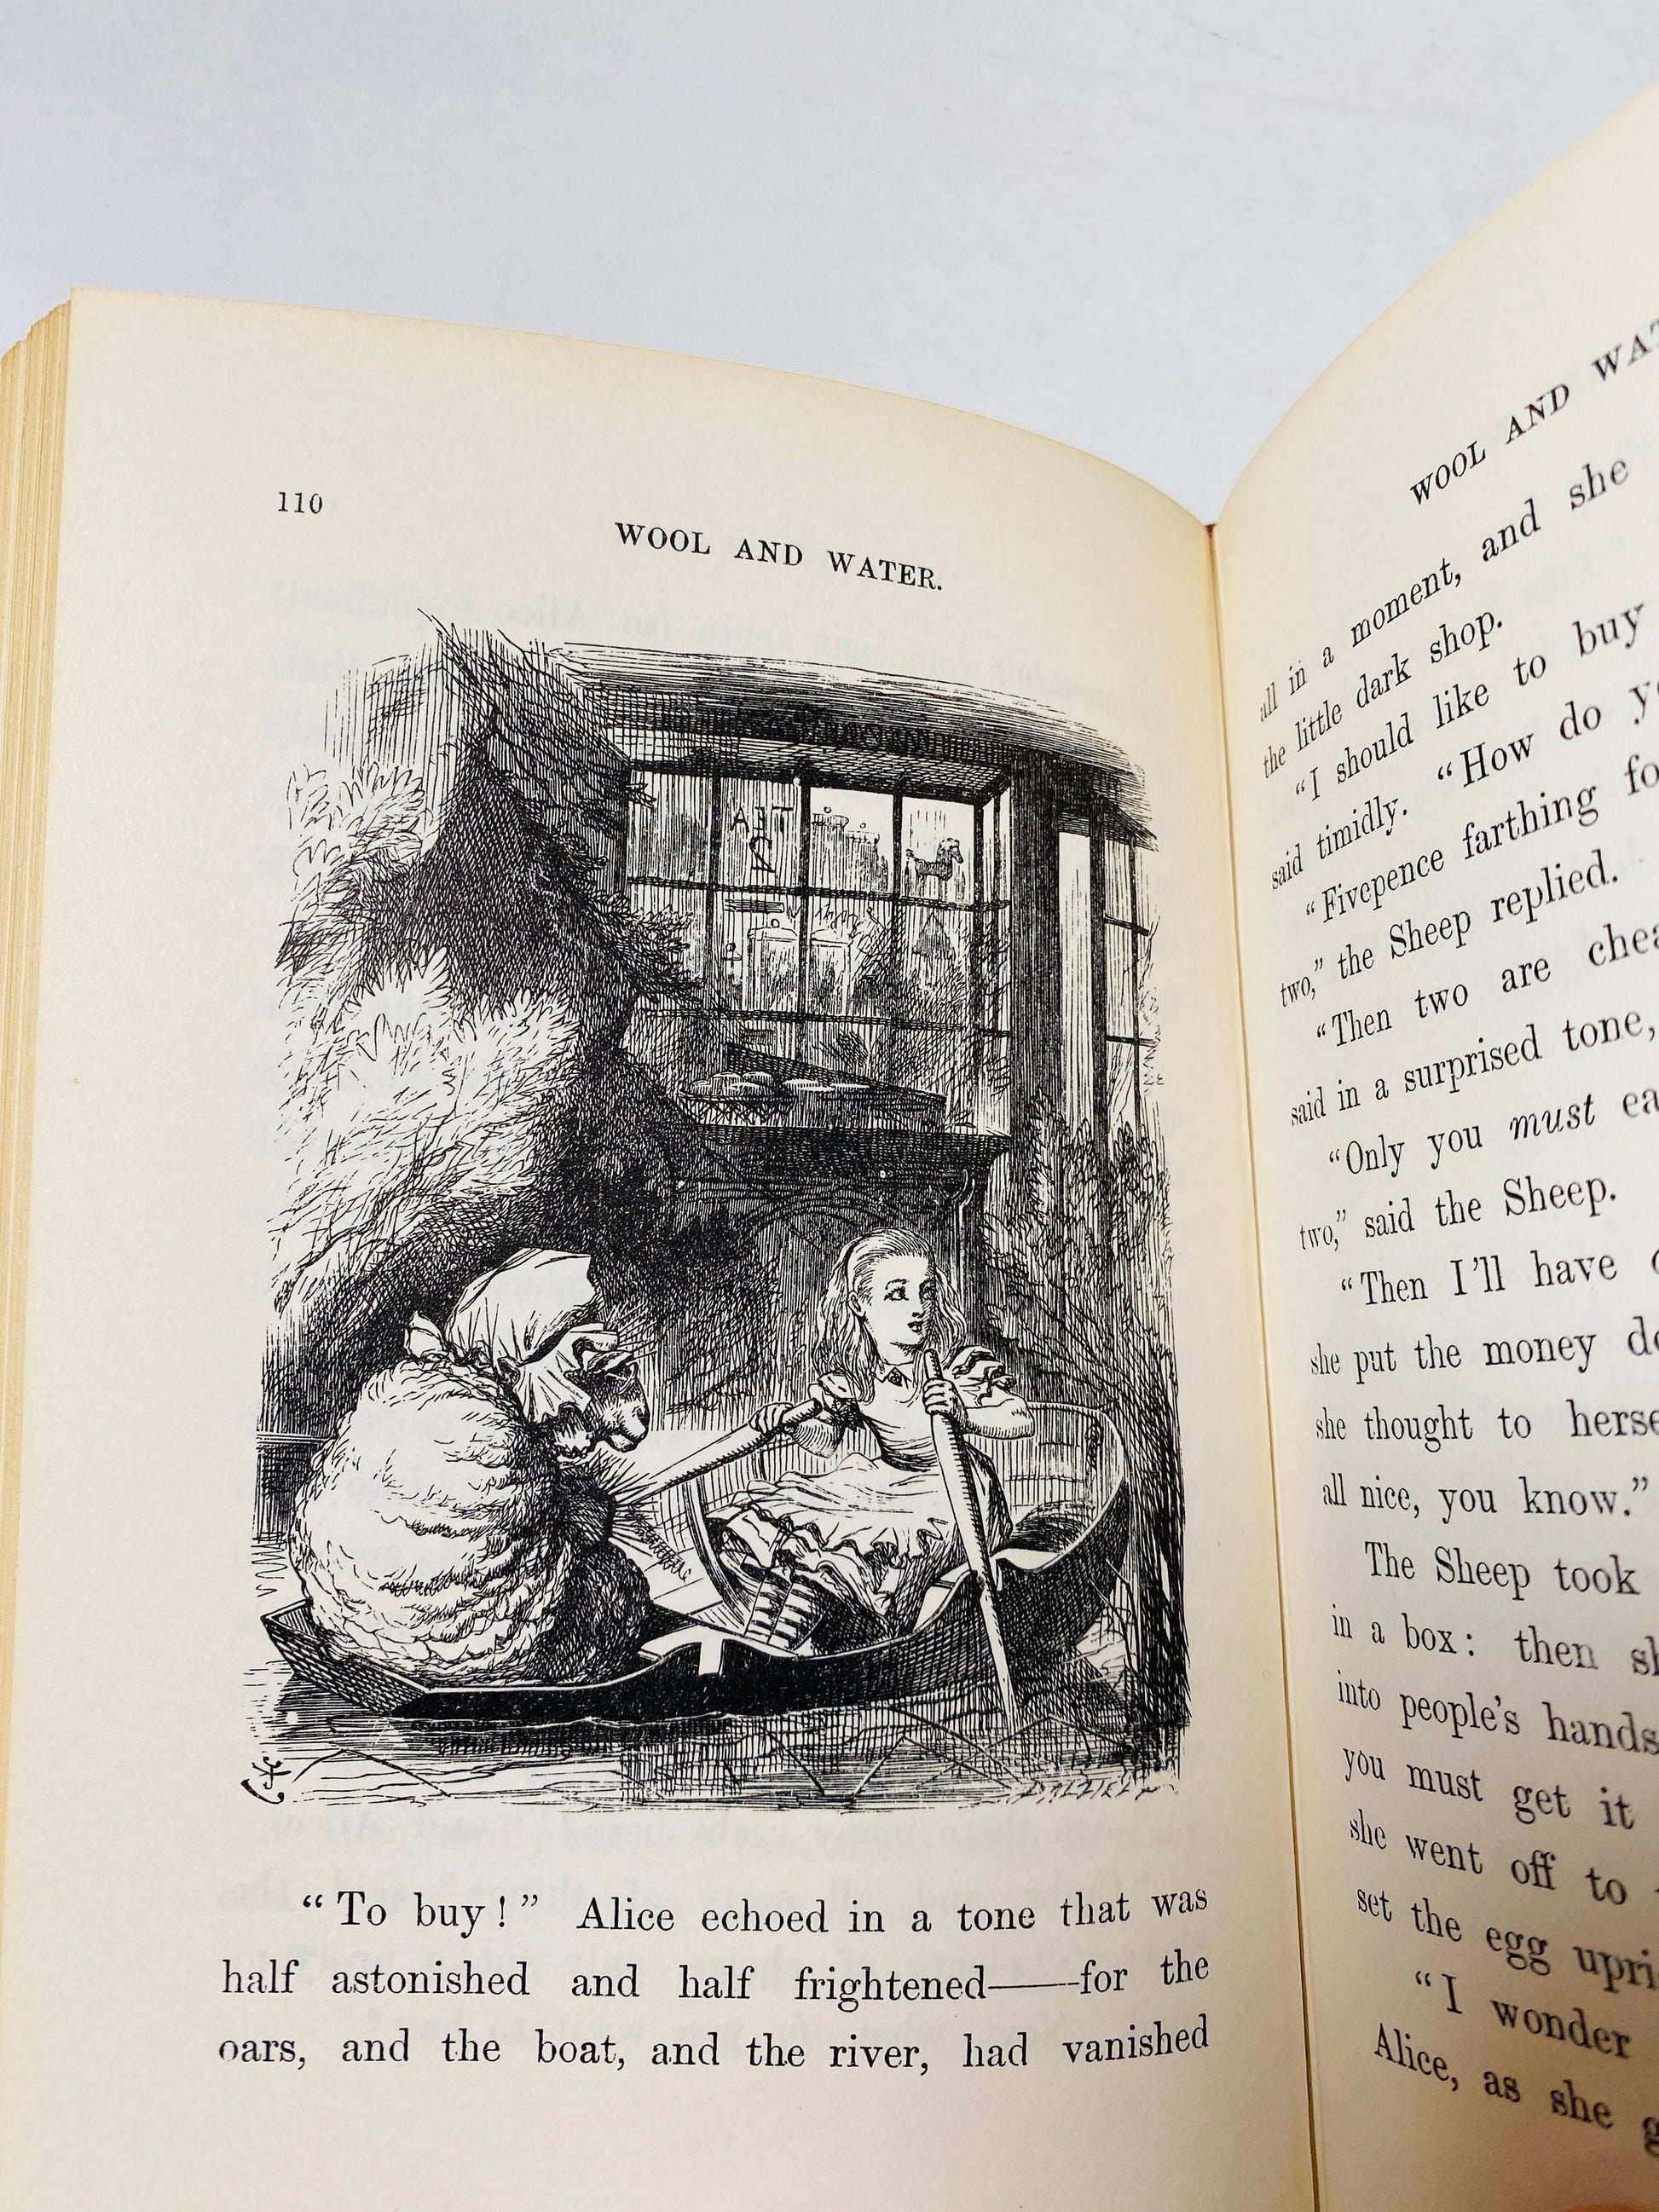 1930 Through the Looking-Glass and What Alice Found There by Lewis Carroll illustrated by John Tenniel London Macmillan